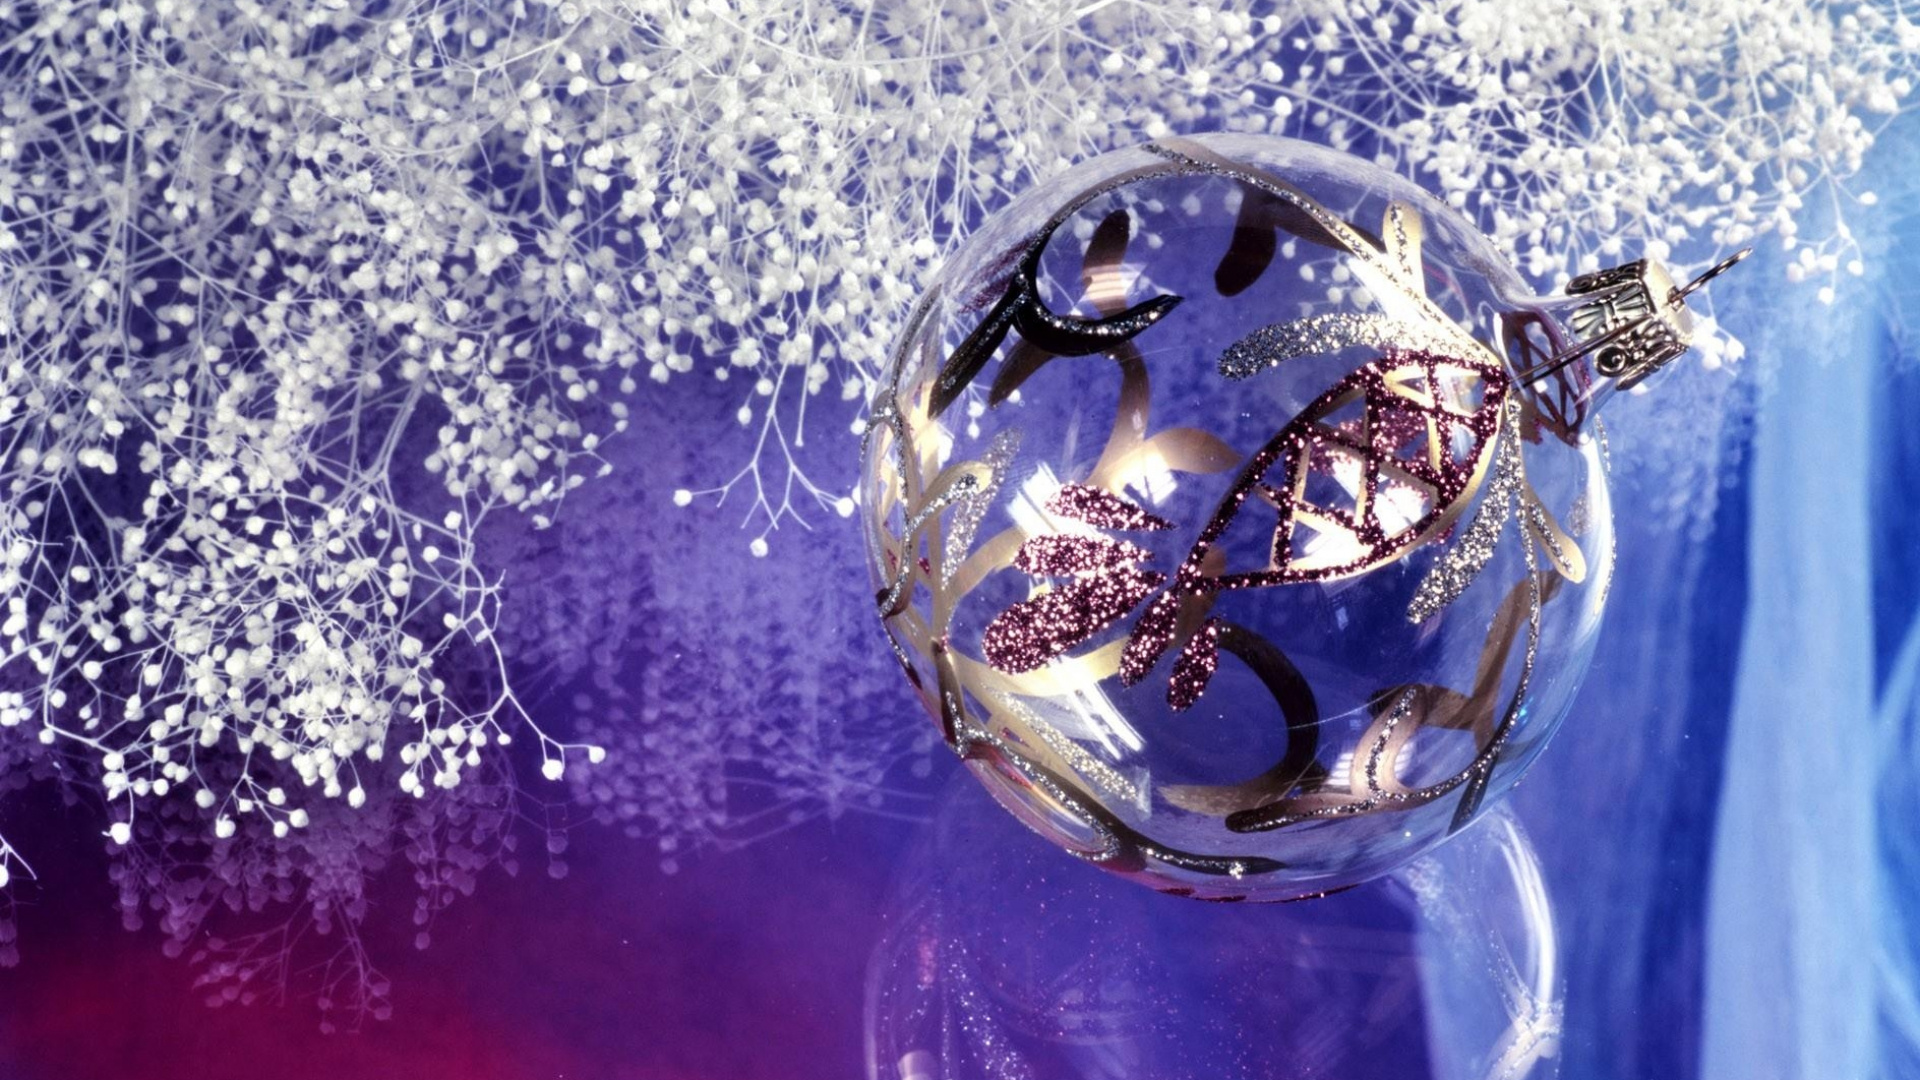 New Year, Purple, Christmas Decoration, Sphere, Greeting Card. Wallpaper in 1920x1080 Resolution